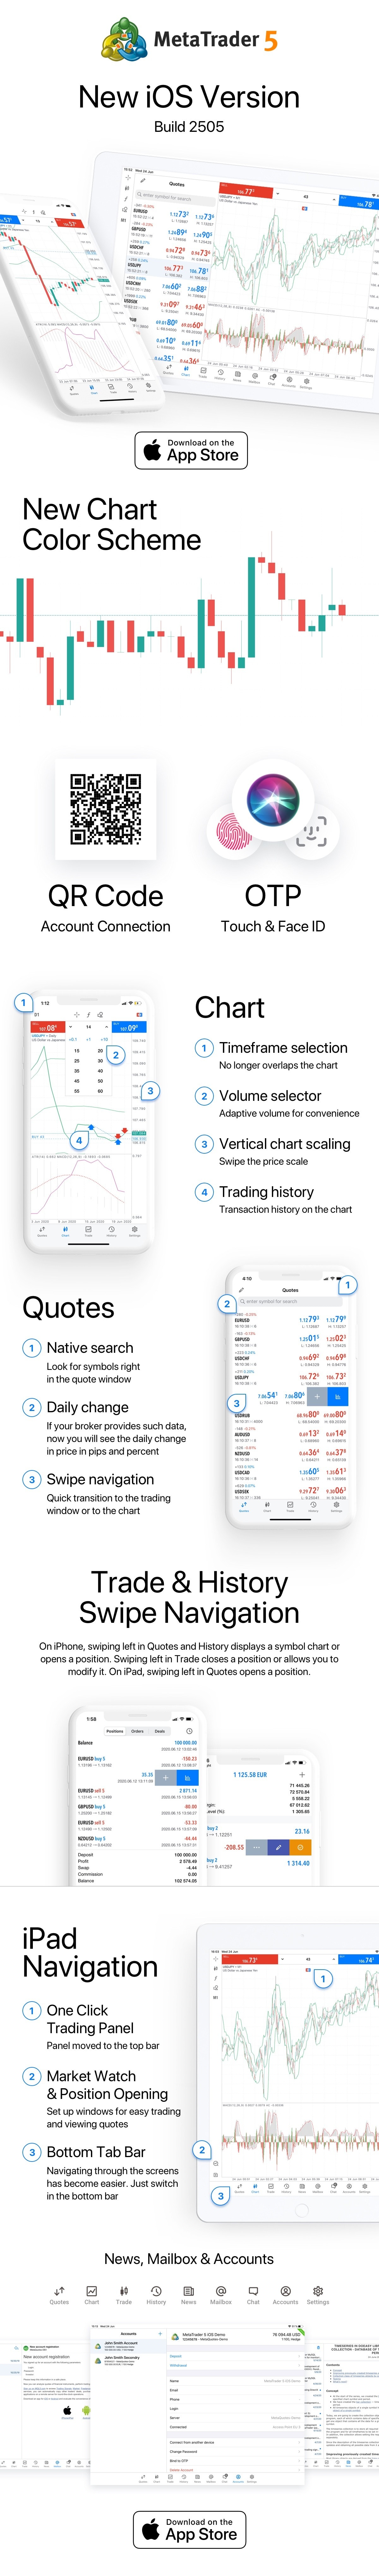 MetaTrader 5 for iOS overhauled — swipes, new sections and color schemes